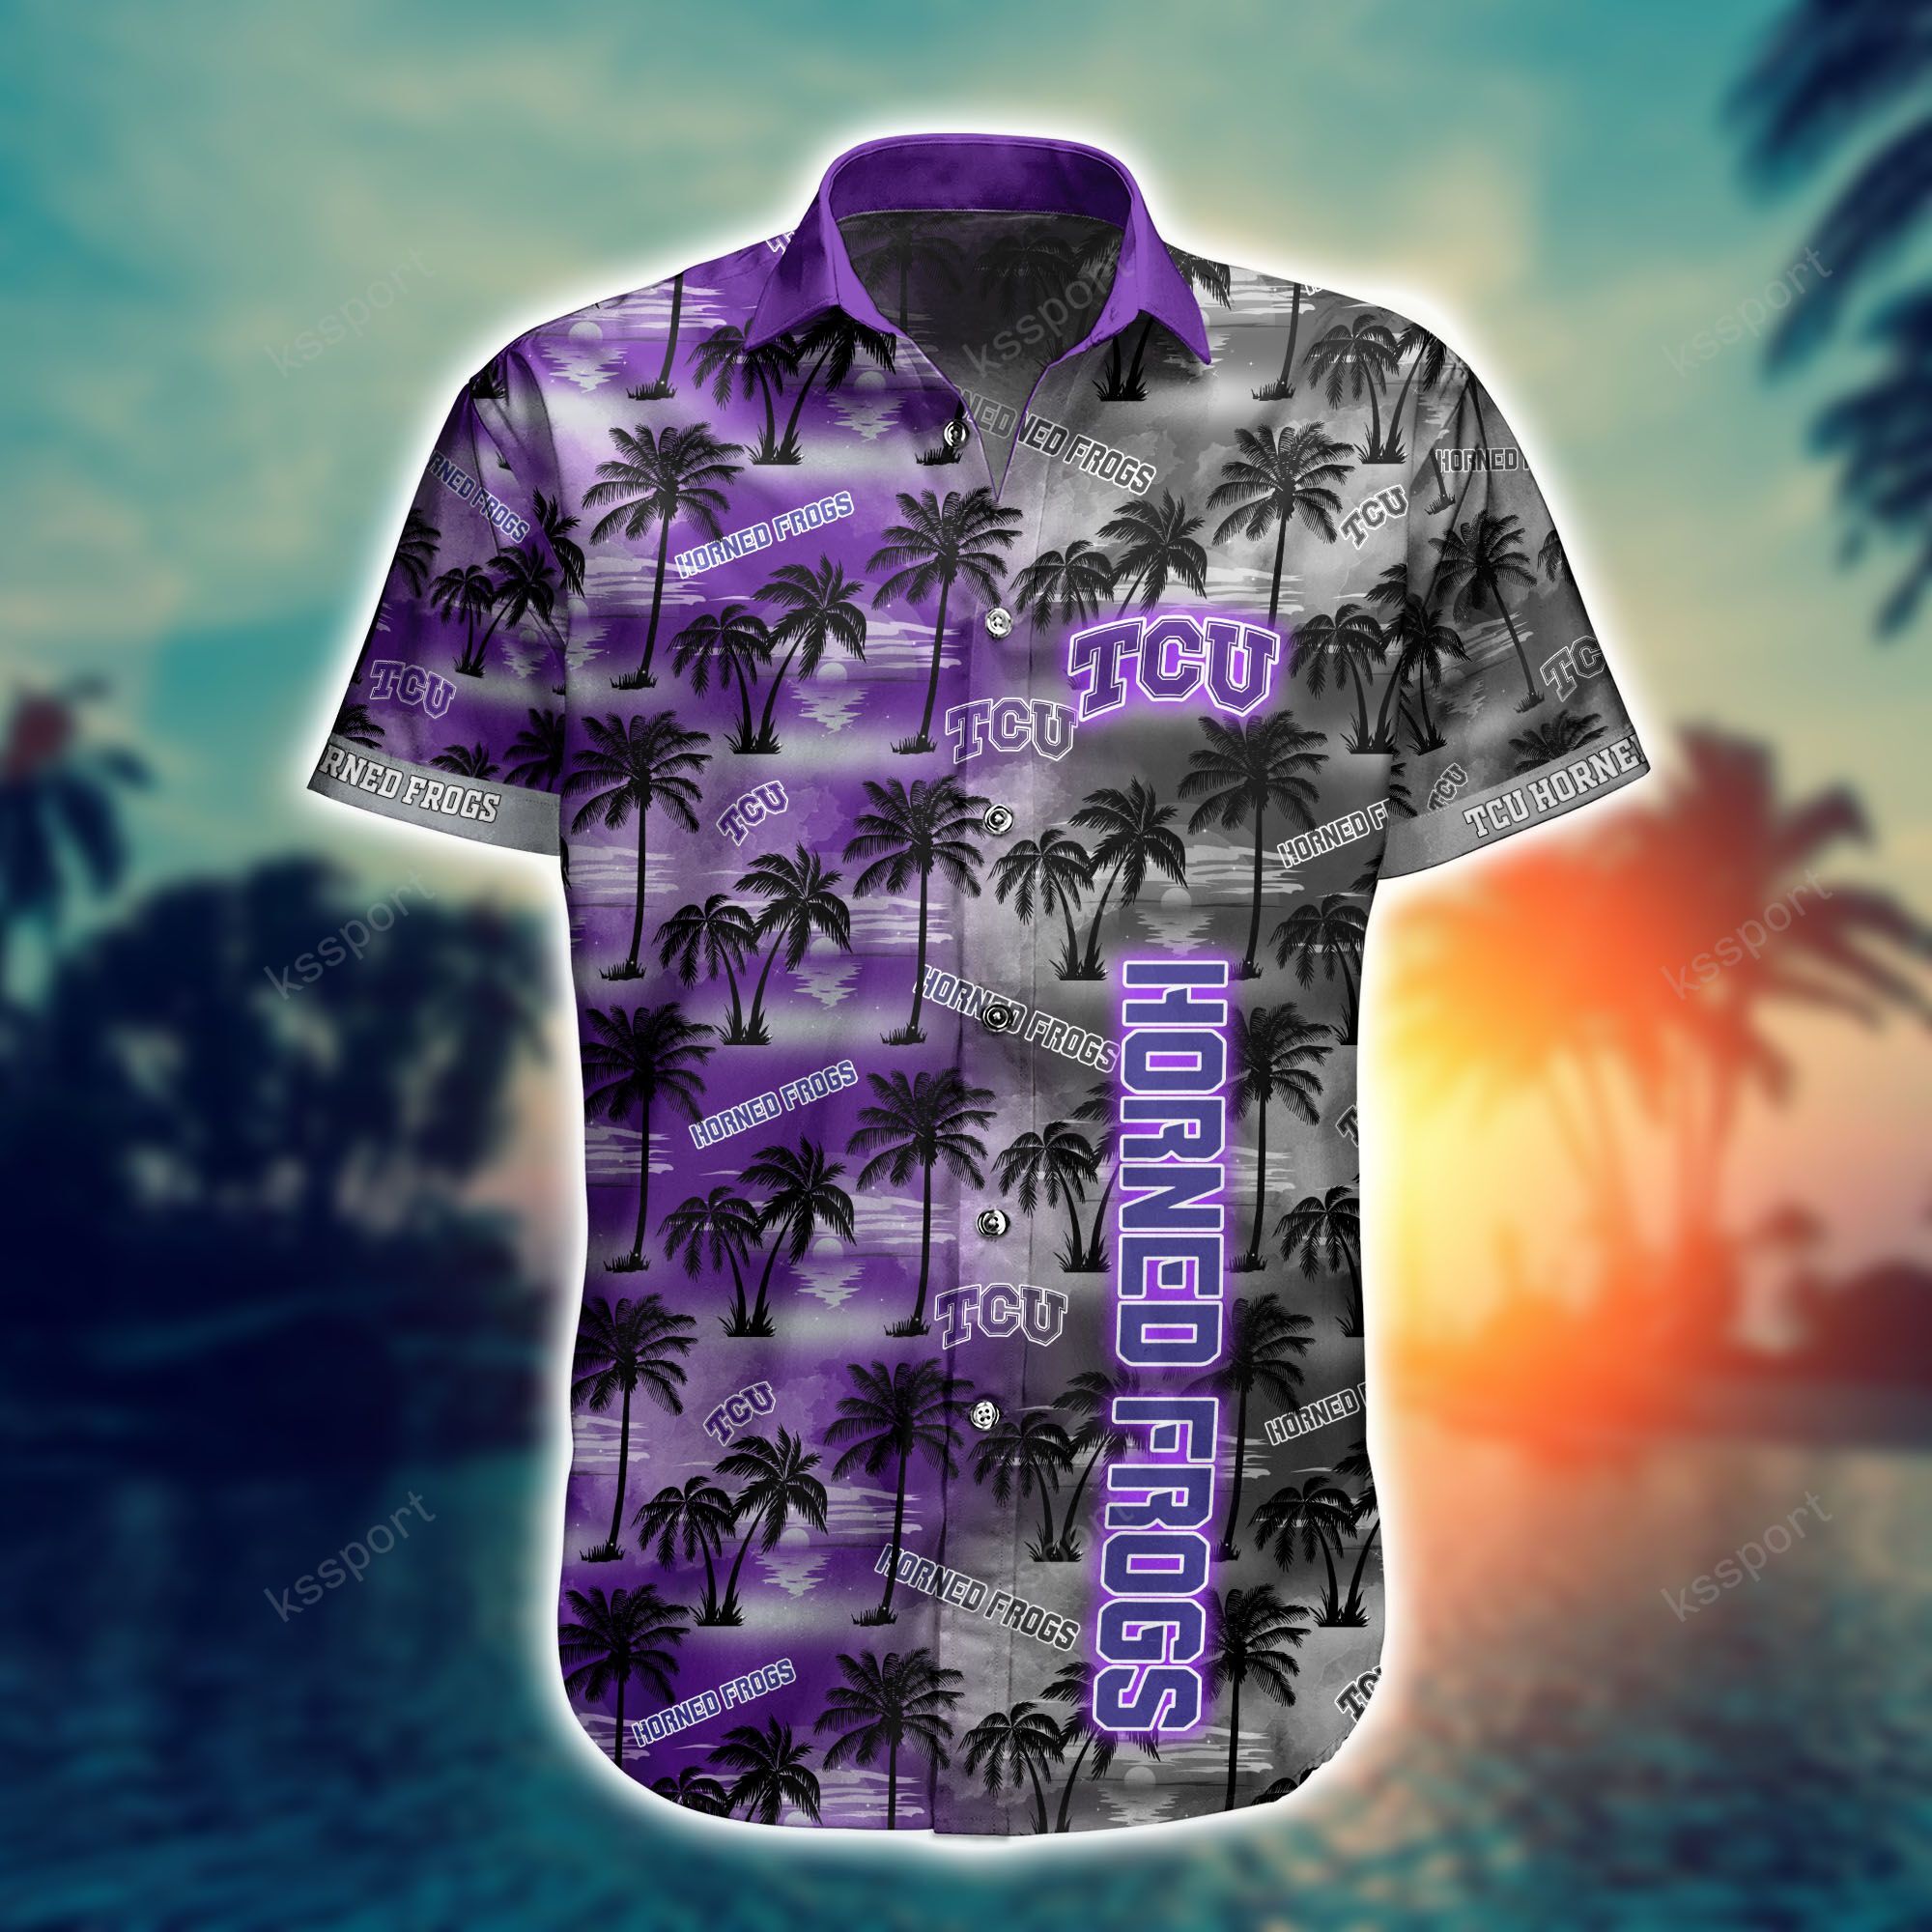 Top cool Hawaiian shirt 2022 - Make sure you get yours today before they run out! 174